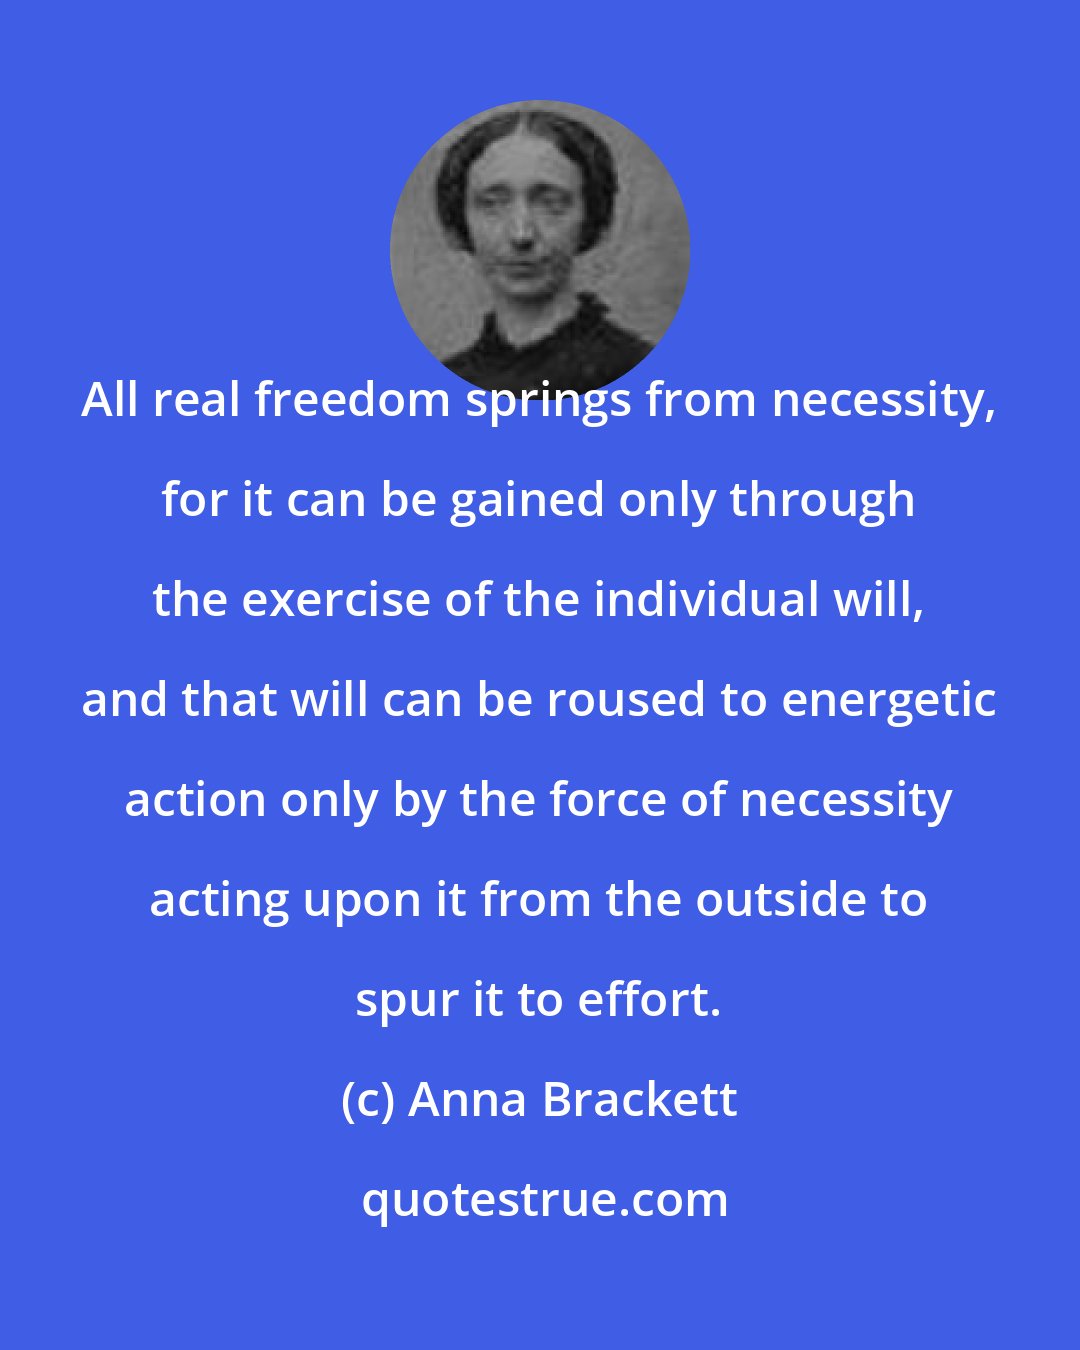 Anna Brackett: All real freedom springs from necessity, for it can be gained only through the exercise of the individual will, and that will can be roused to energetic action only by the force of necessity acting upon it from the outside to spur it to effort.